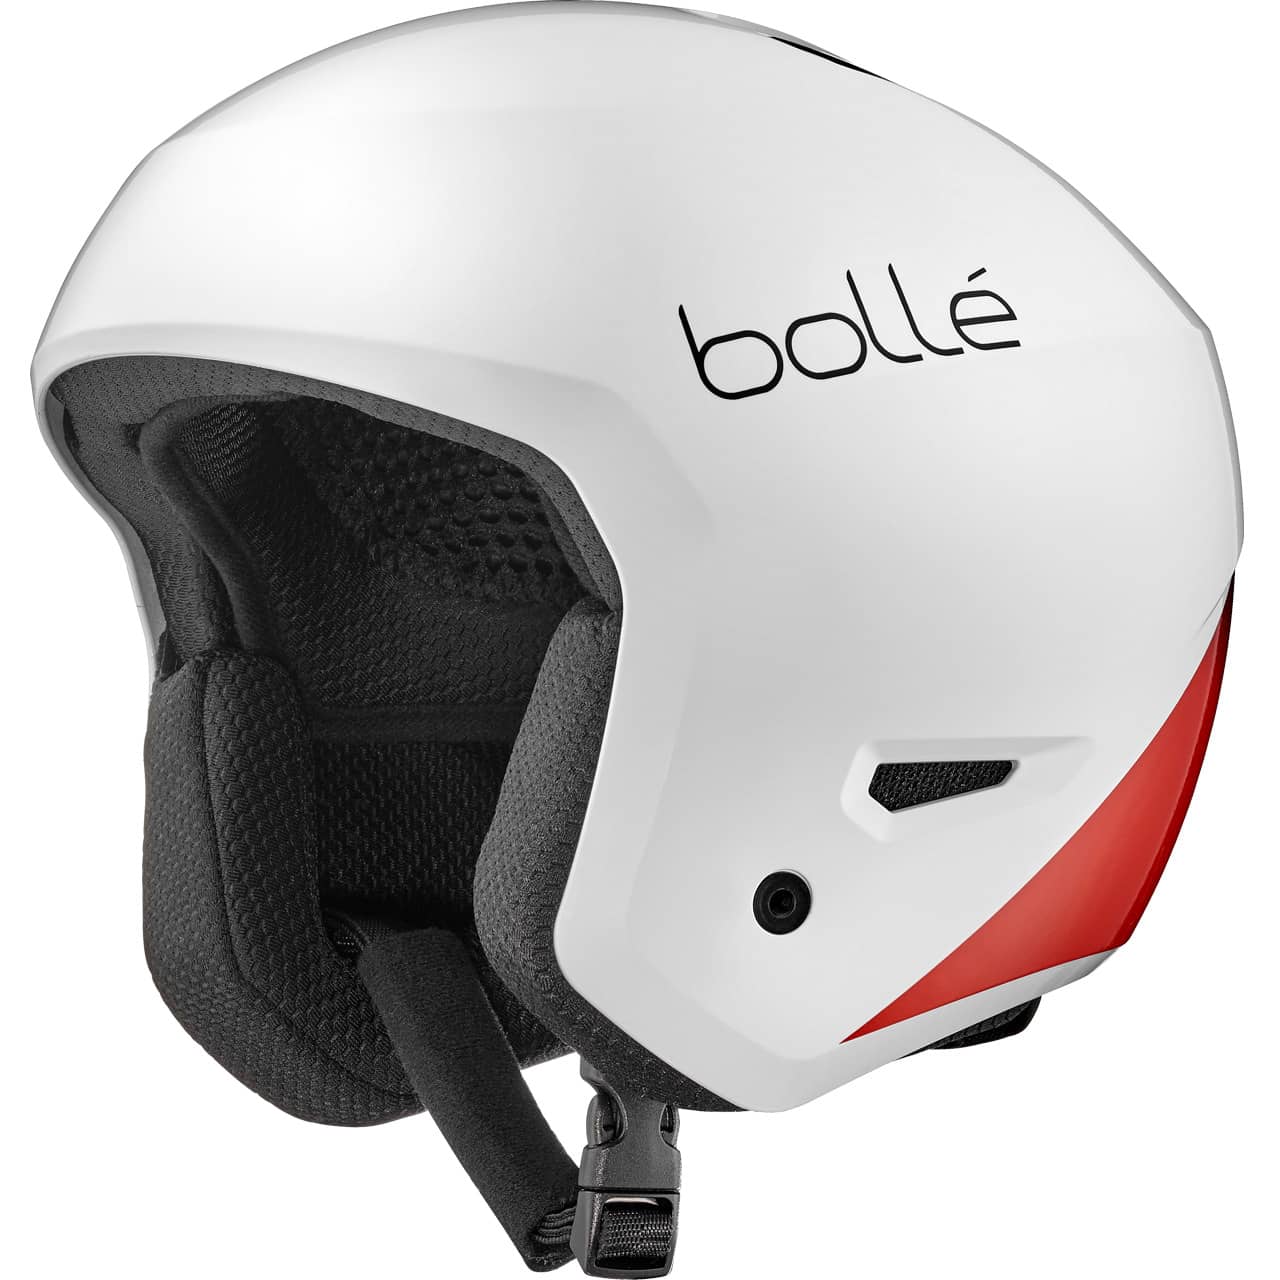 Bolle Medalist Pure white/black/red shiny |